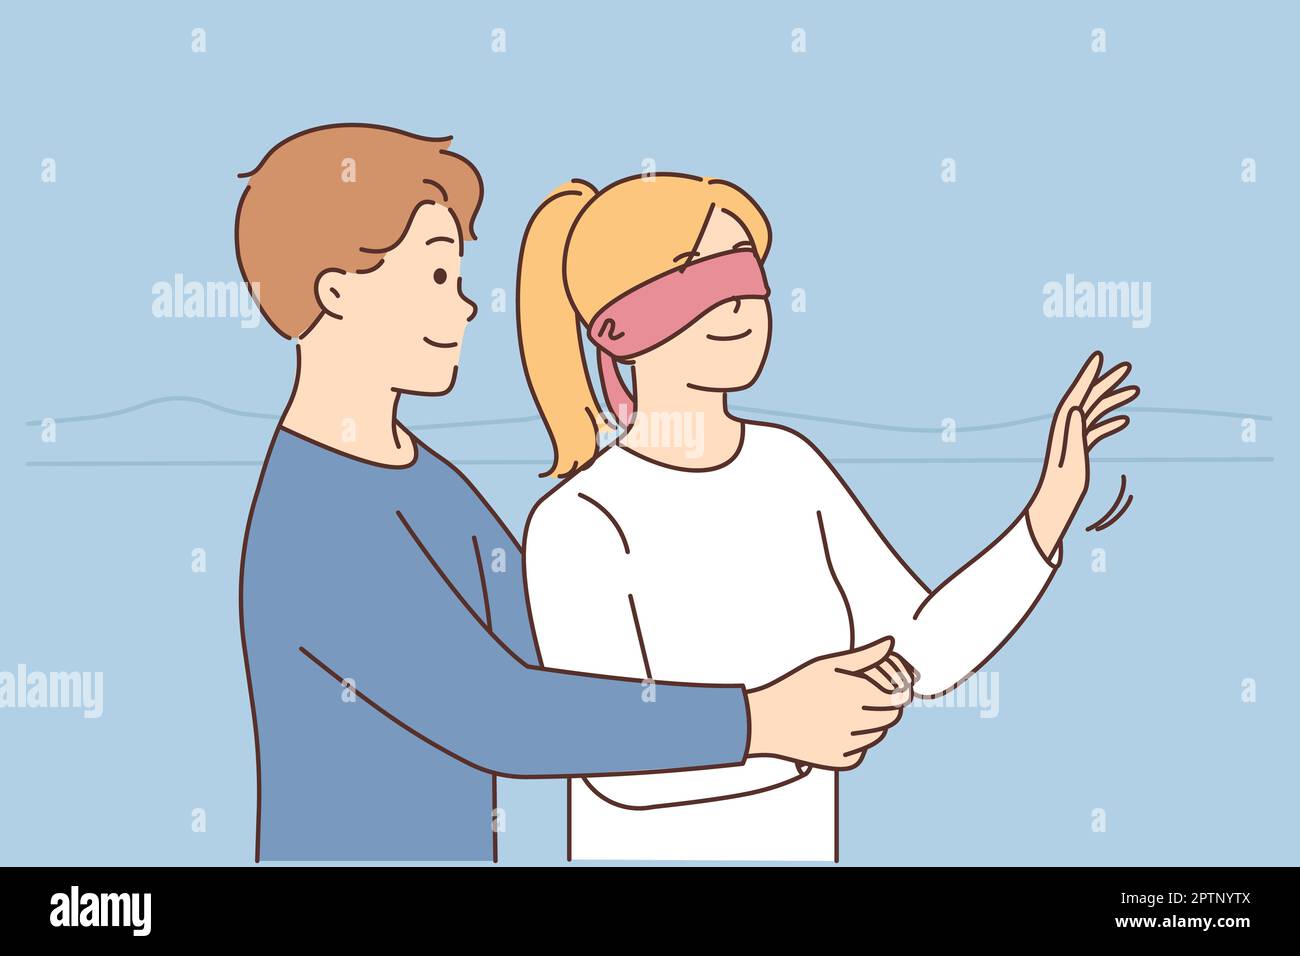 Blindfolded Man Throws Up His Hands Stock Photo, Picture and Royalty Free  Image. Image 7562056.